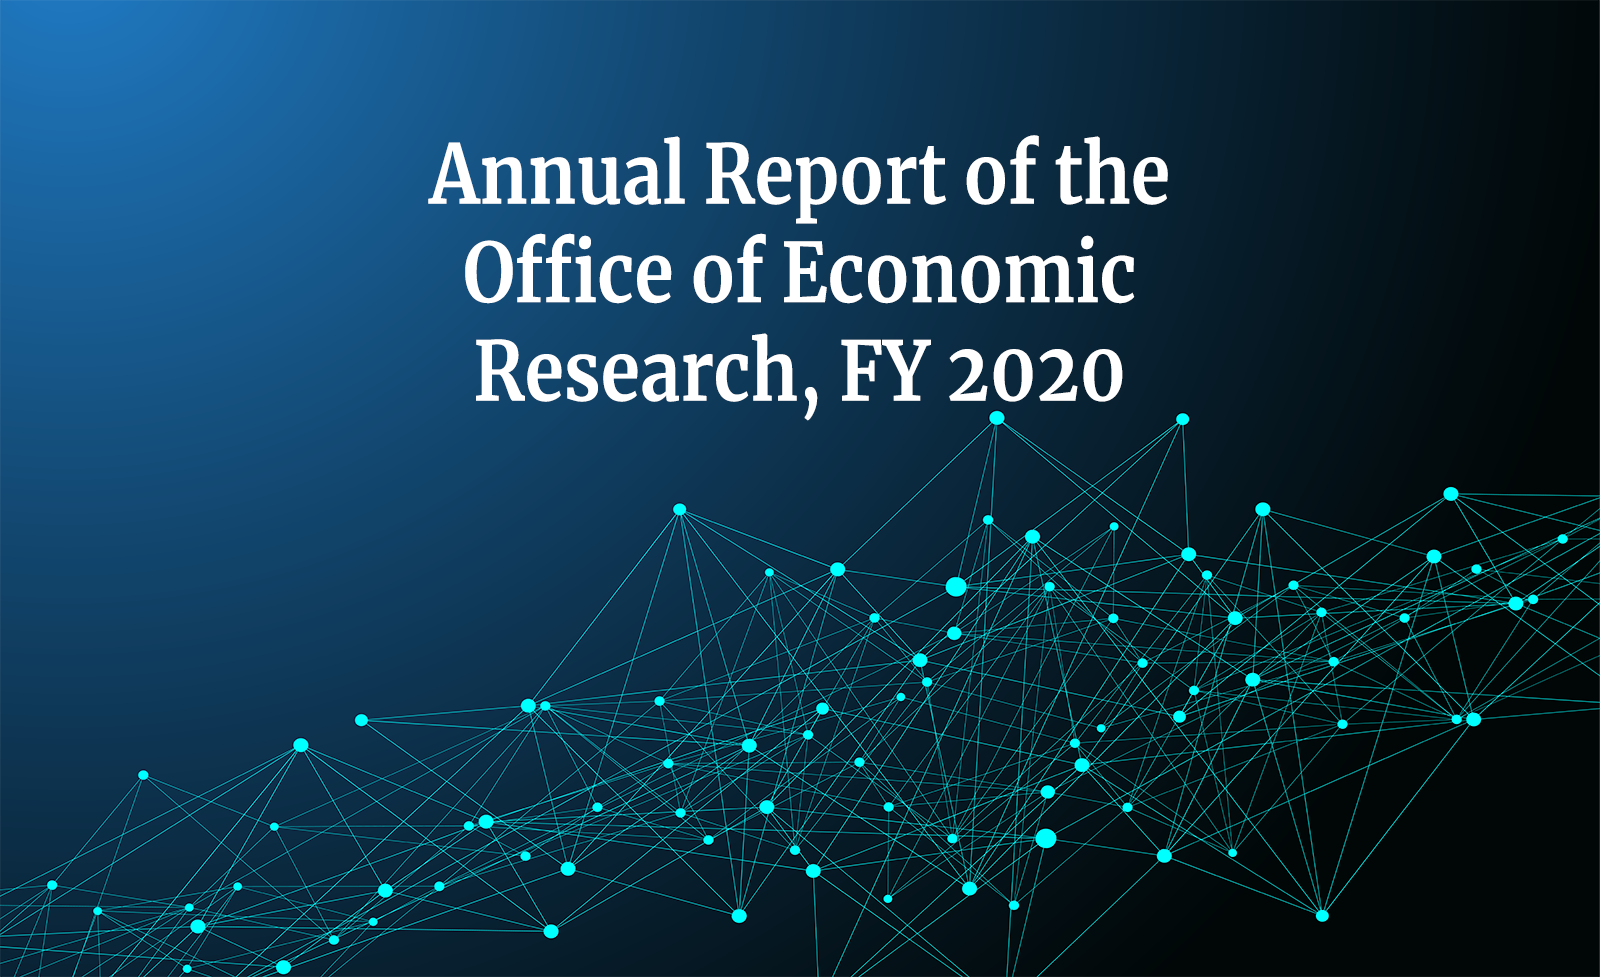 Annual Report of the Office of Economic Research, FY 2020